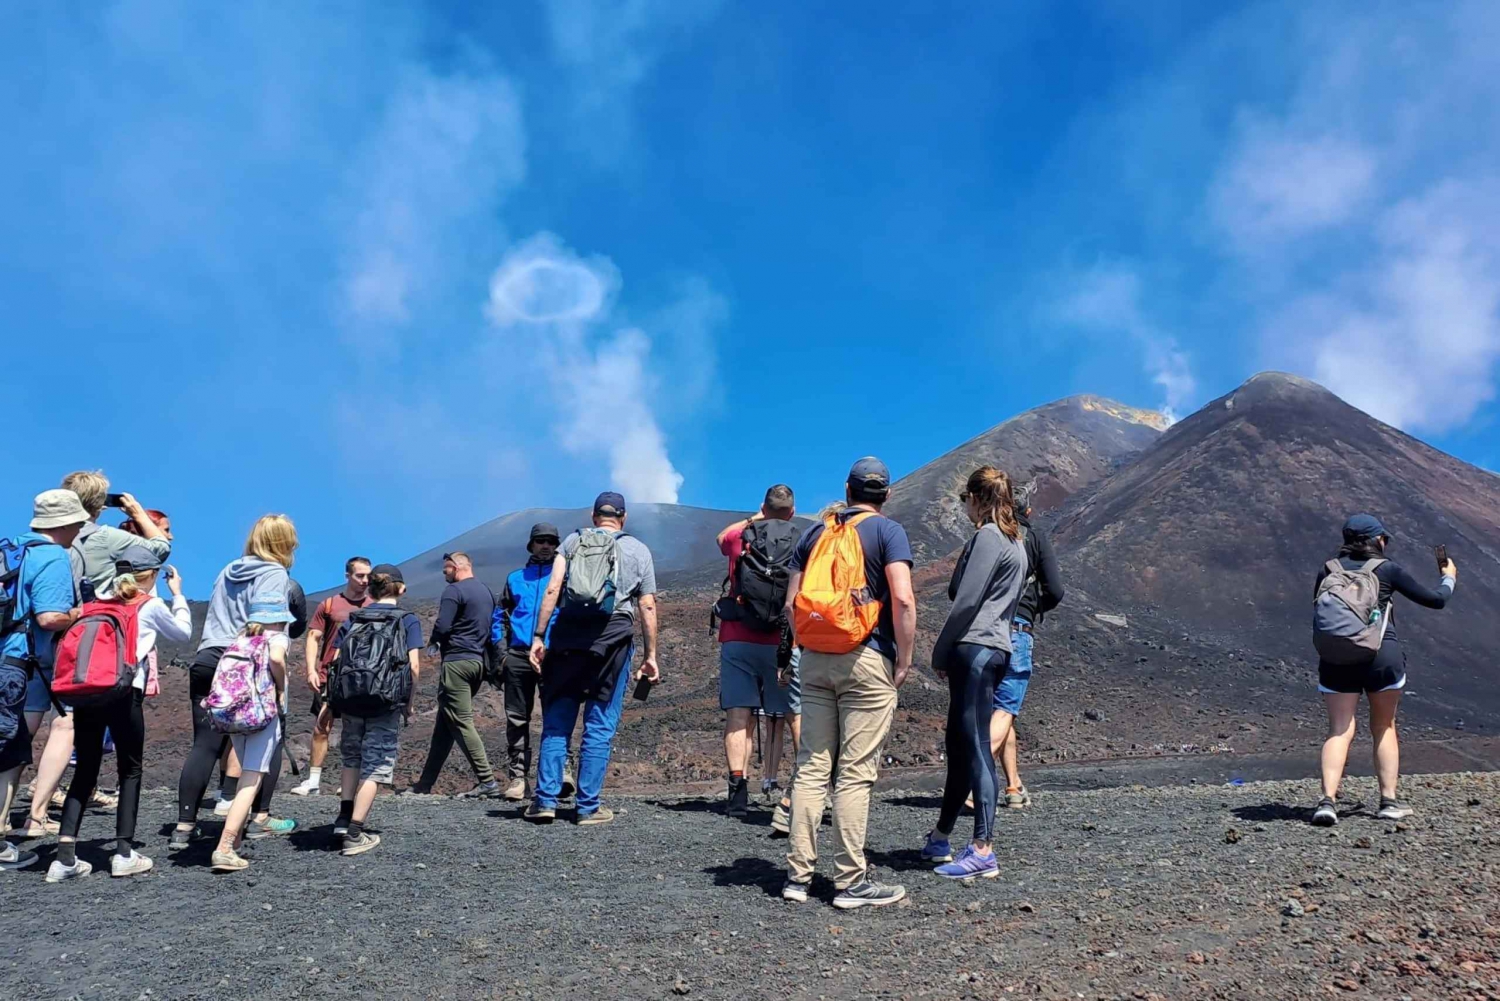 Catania: Guided Tour of Etna with Wine Tasting & Appetizers